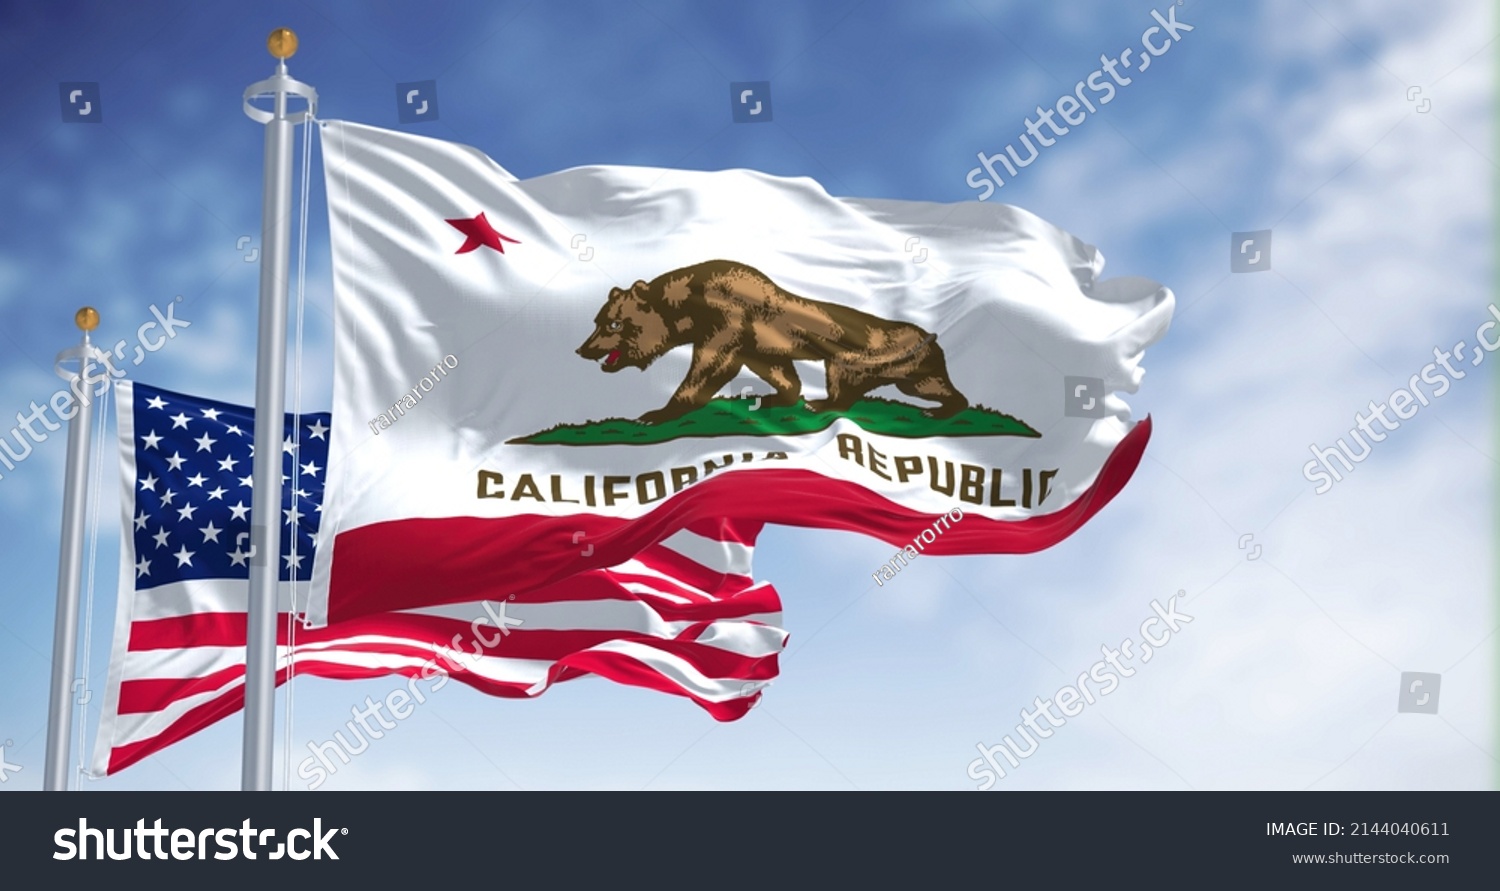 The California state flag flying along with the national flag of the United States of America. In the background there is a clear sky. The flag depicts a walking bear and a five-pointed red star #2144040611